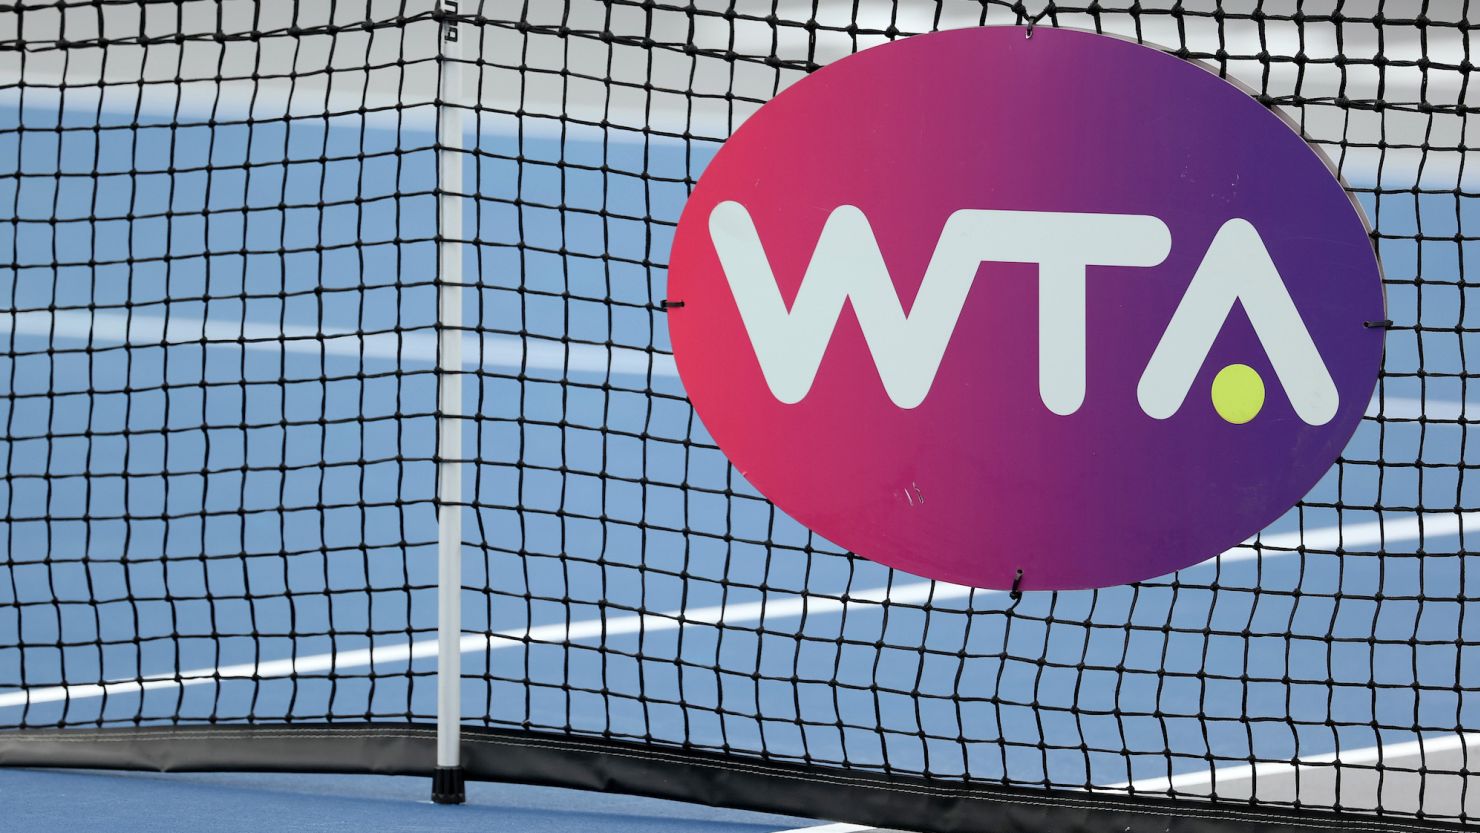 Nine of the world's top 10 female players announced for Dubai Duty Free  Tennis Championships